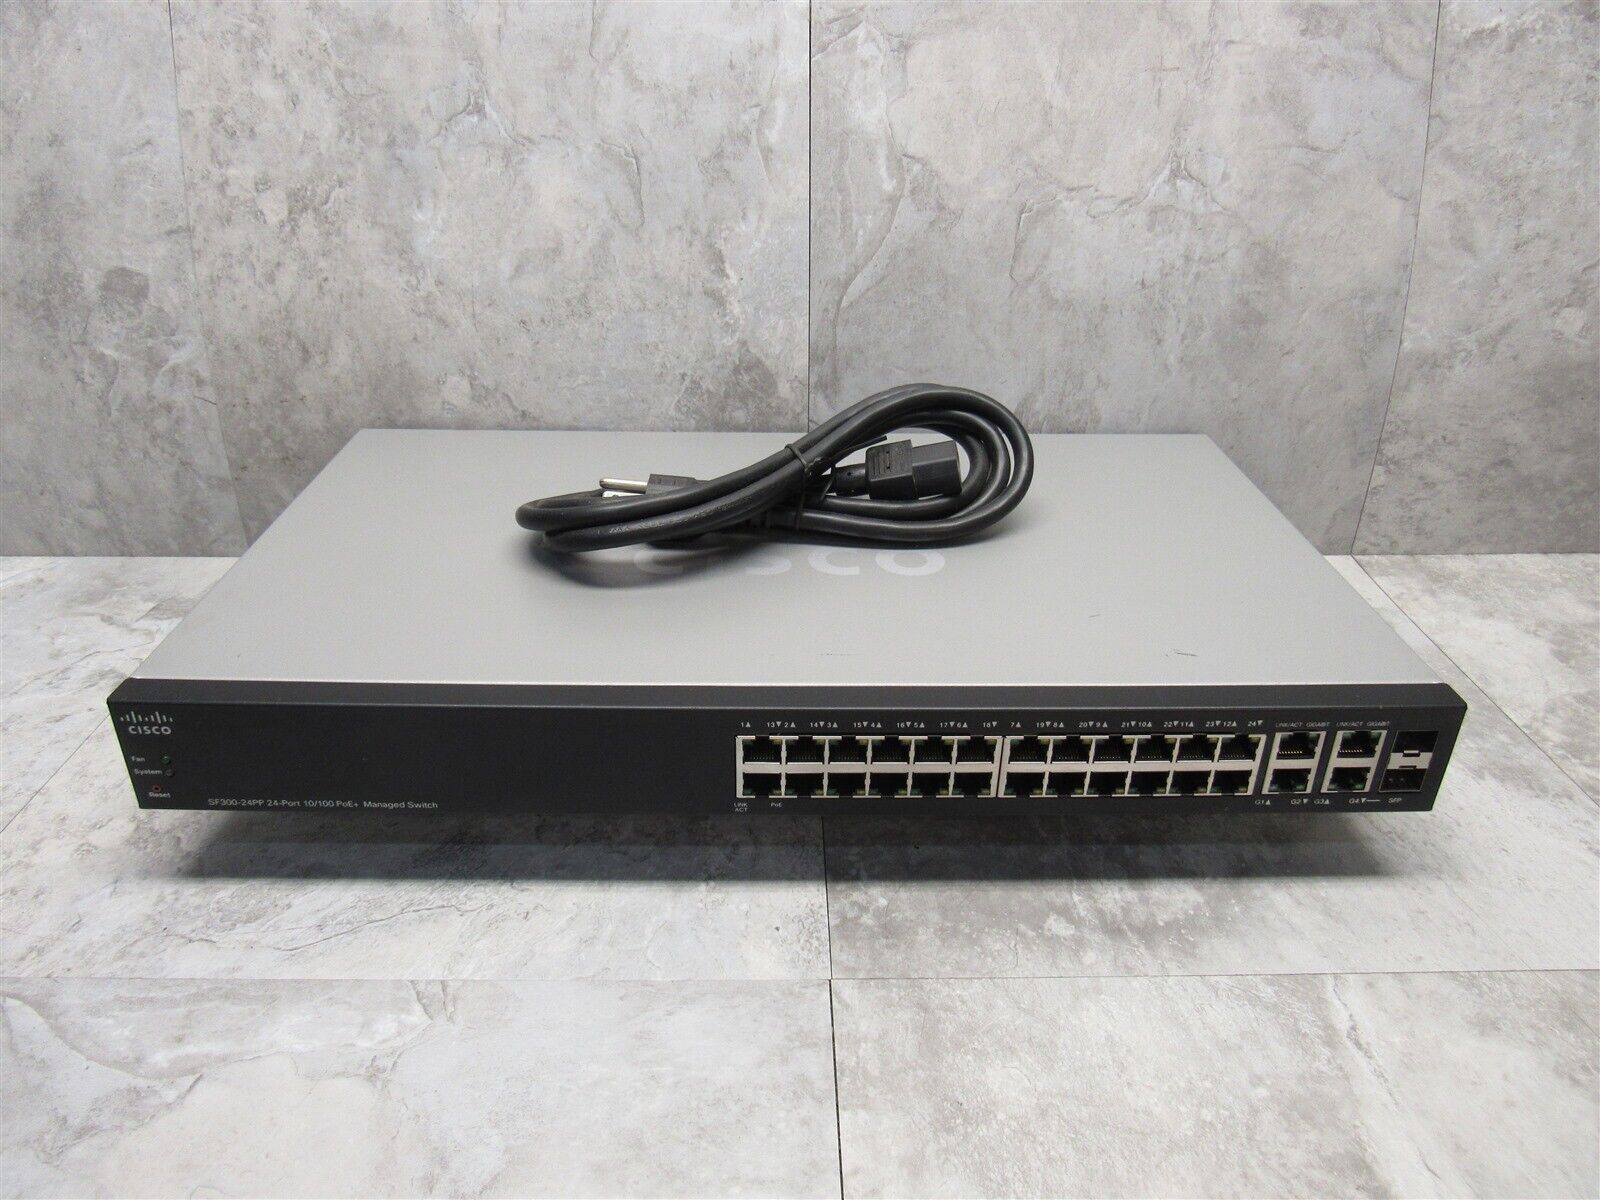 Cisco SF300-24PP 24-Port 10/100 PoE+ Managed Network Switch SF300-24PP-K9